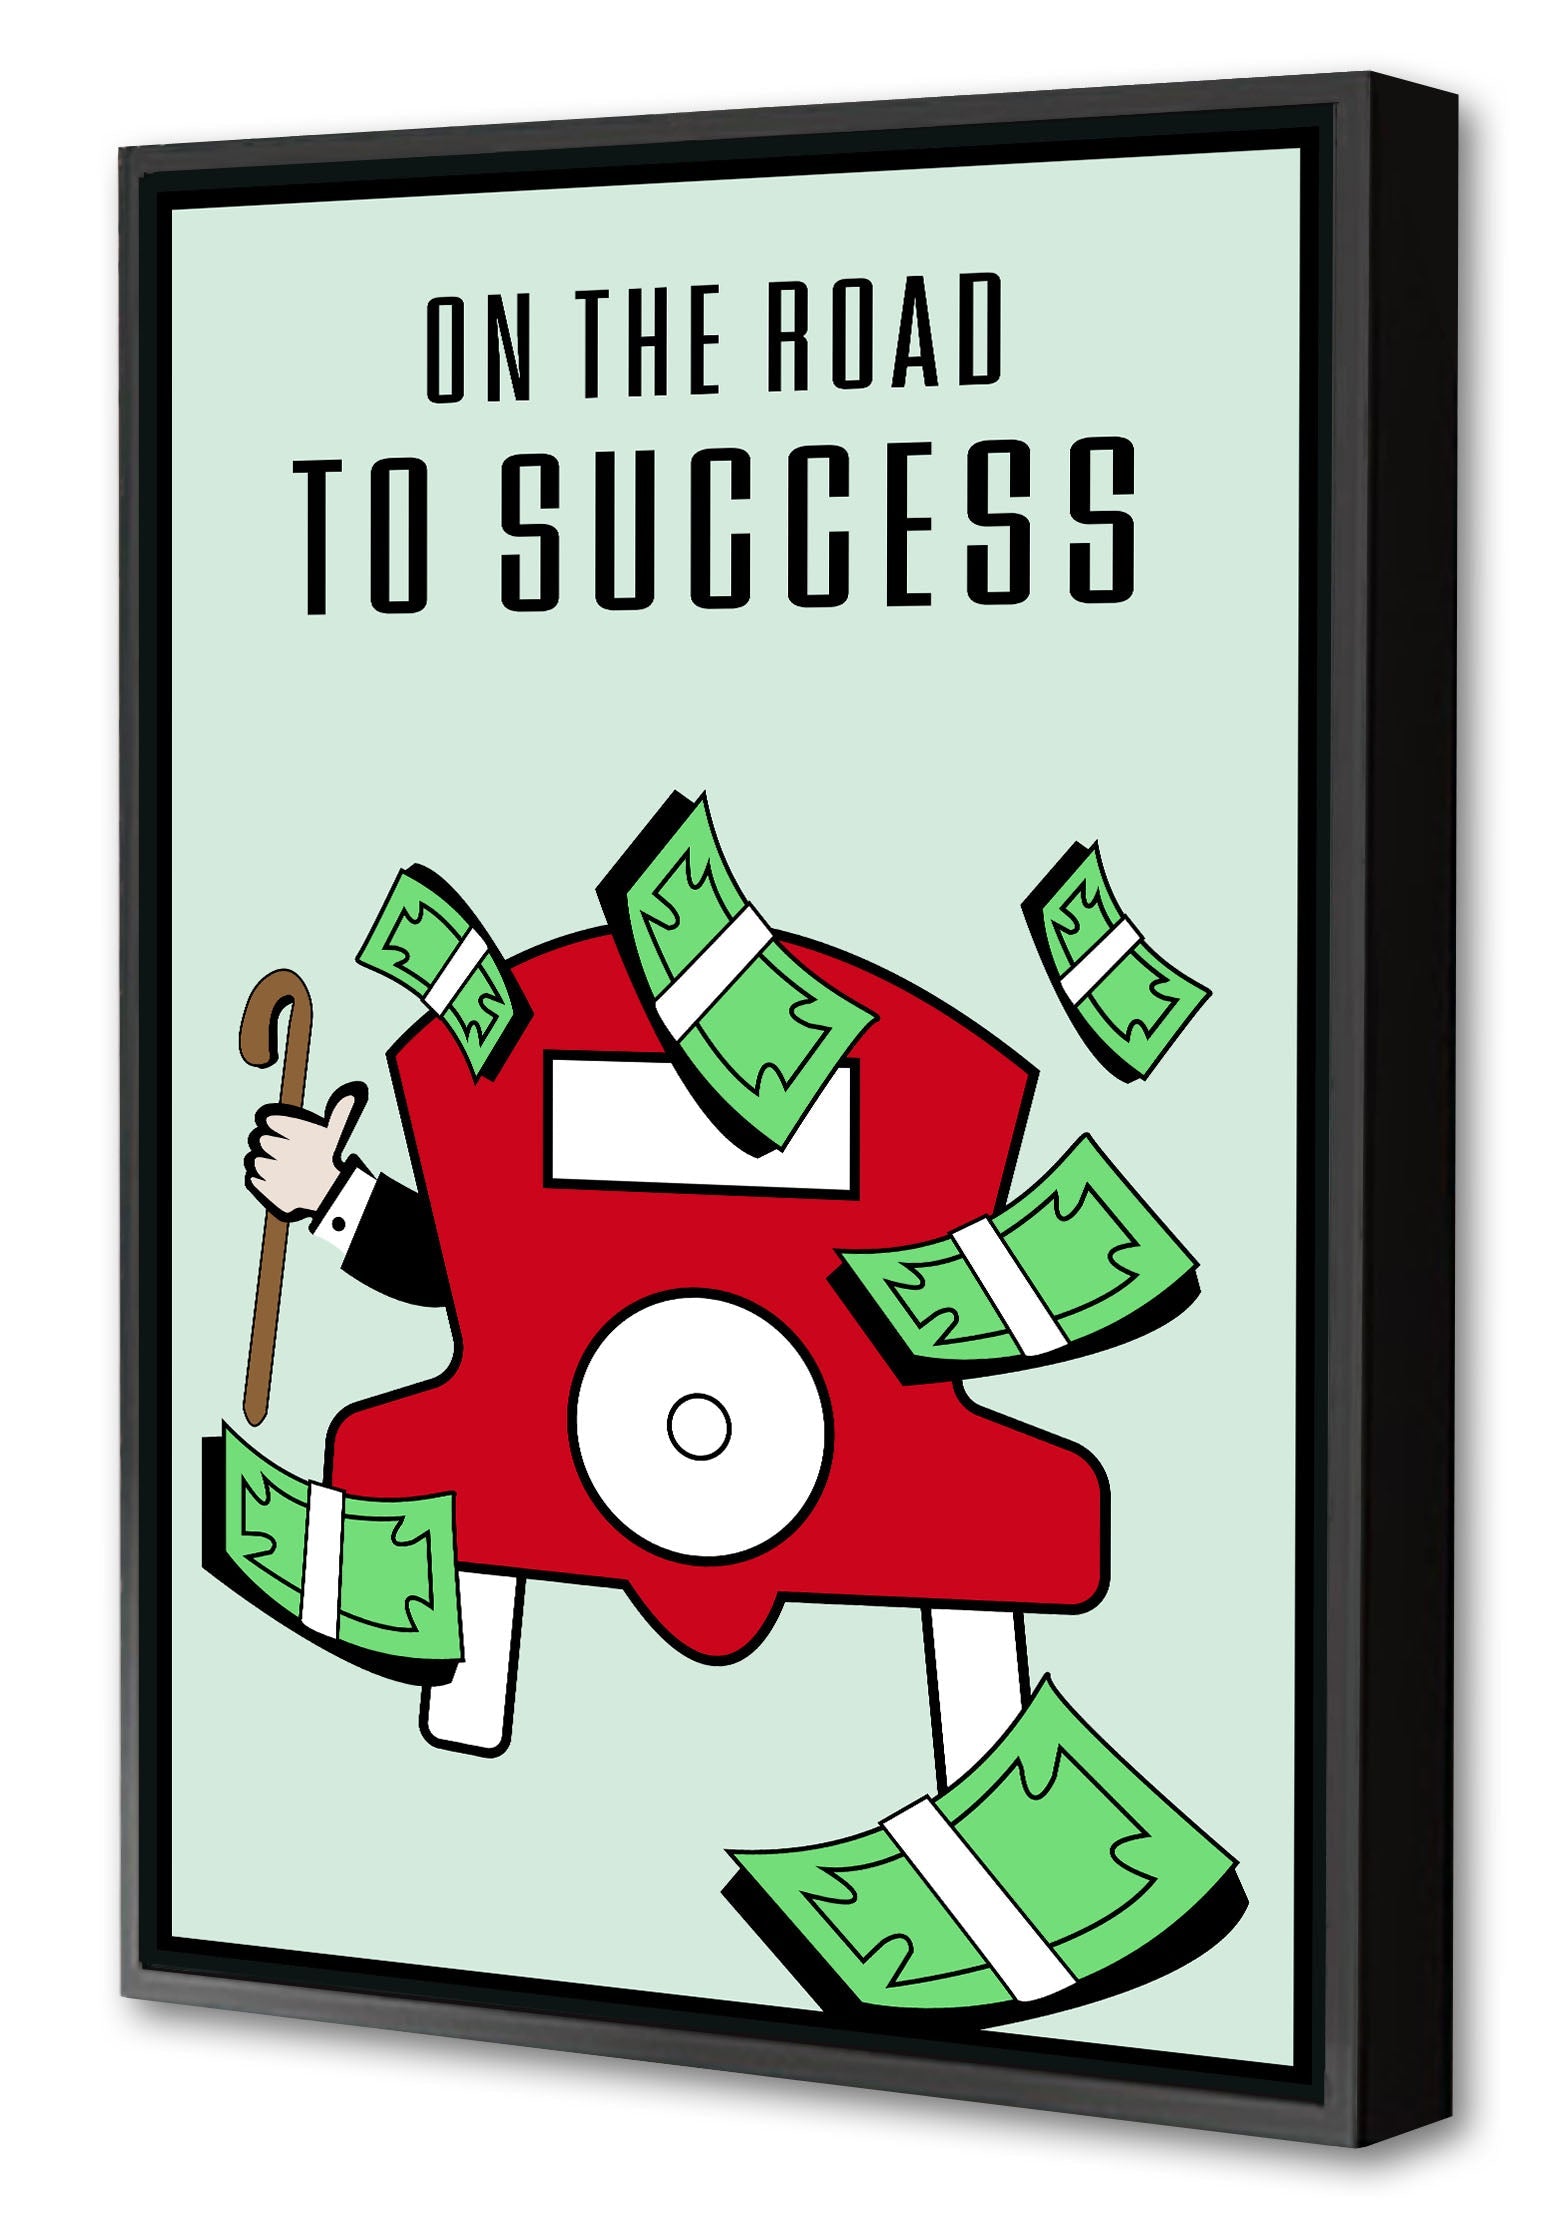 on the road to success-monopoly, print-Canvas Print with Box Frame-40 x 60 cm-BLUE SHAKER